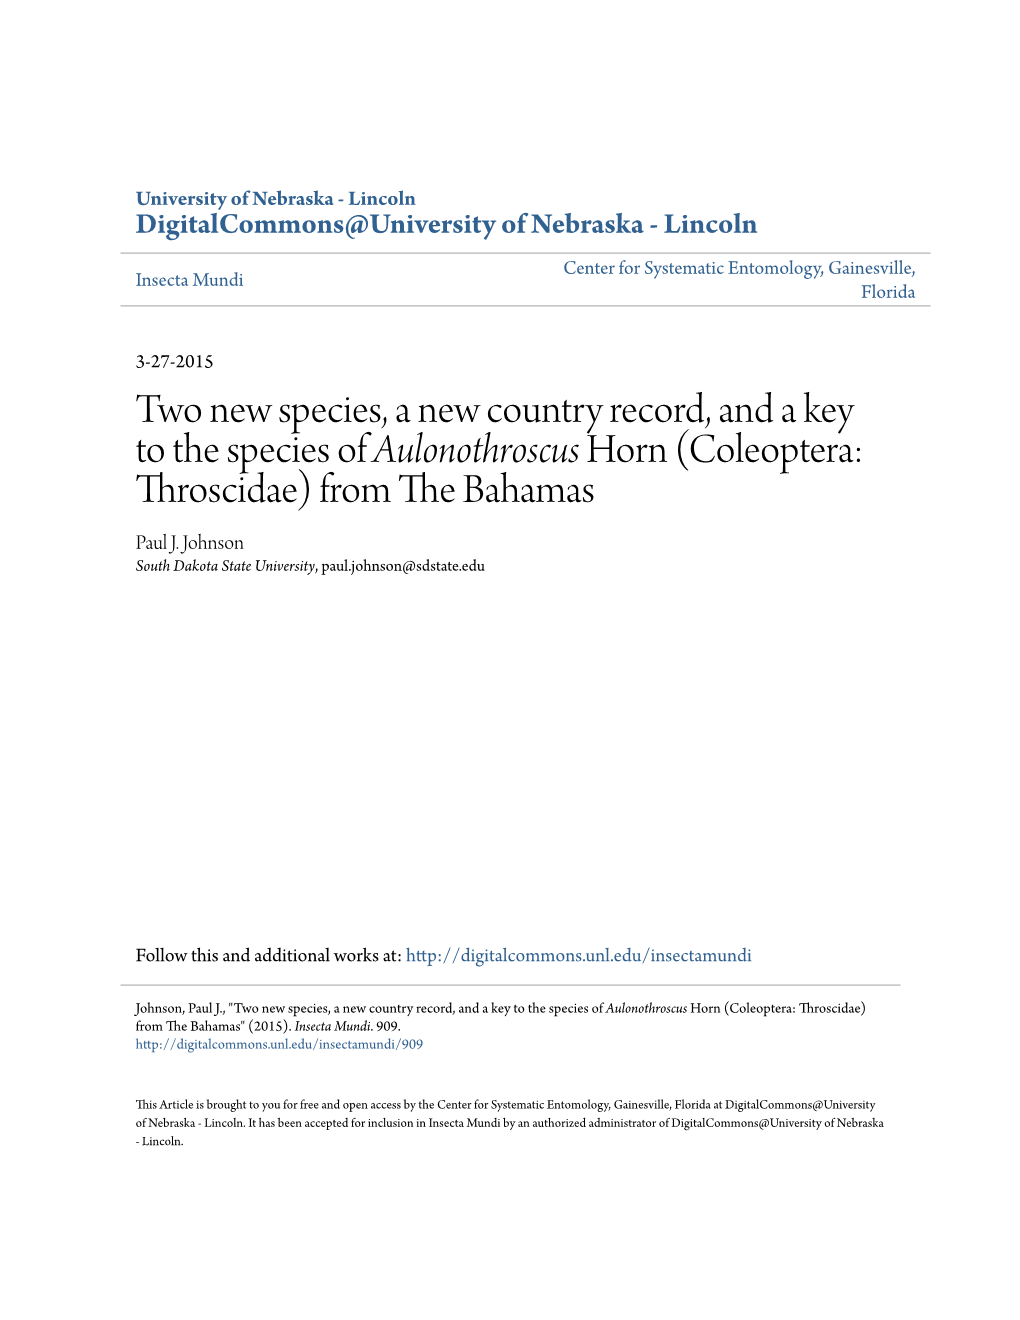 Two New Species, a New Country Record, and a Key to the Species of Aulonothroscus Horn (Coleoptera: Throscidae) from the Ahb Amas Paul J